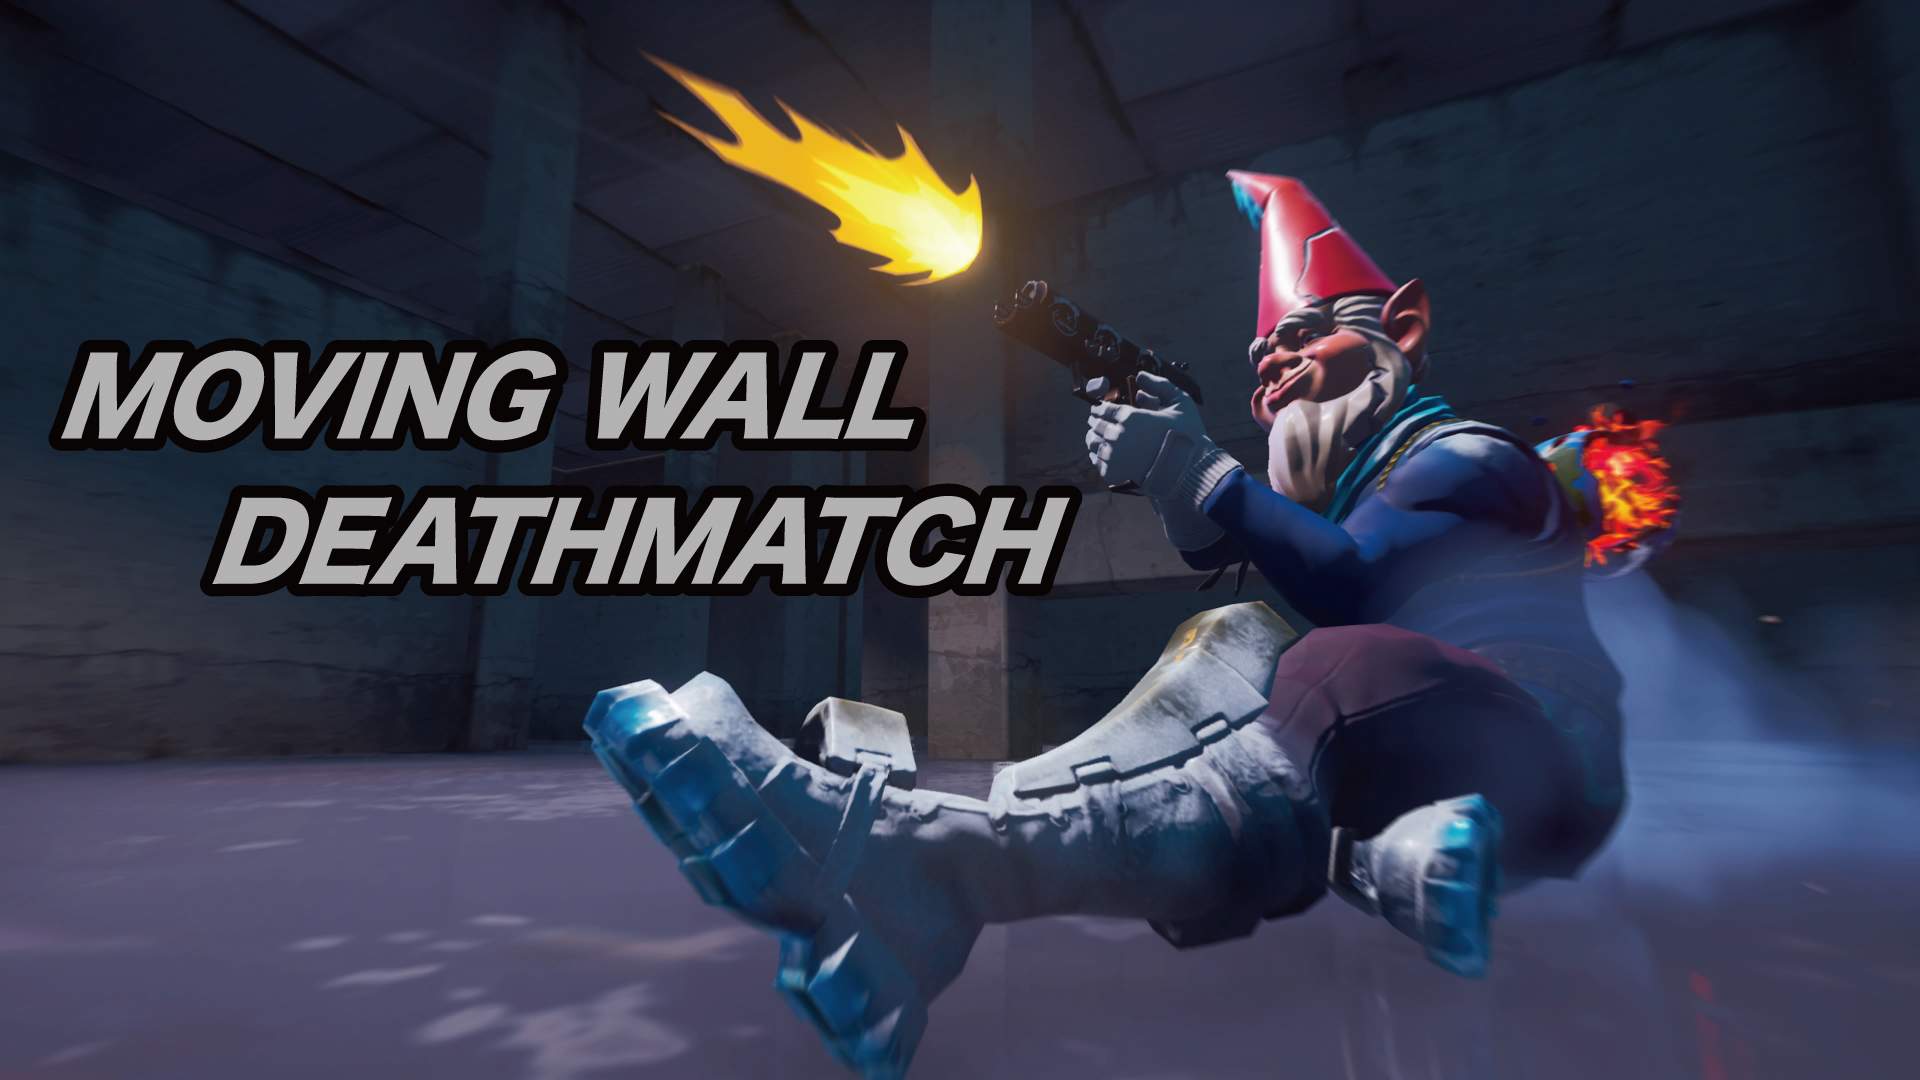 MOVING WALL DEATHMATCH!